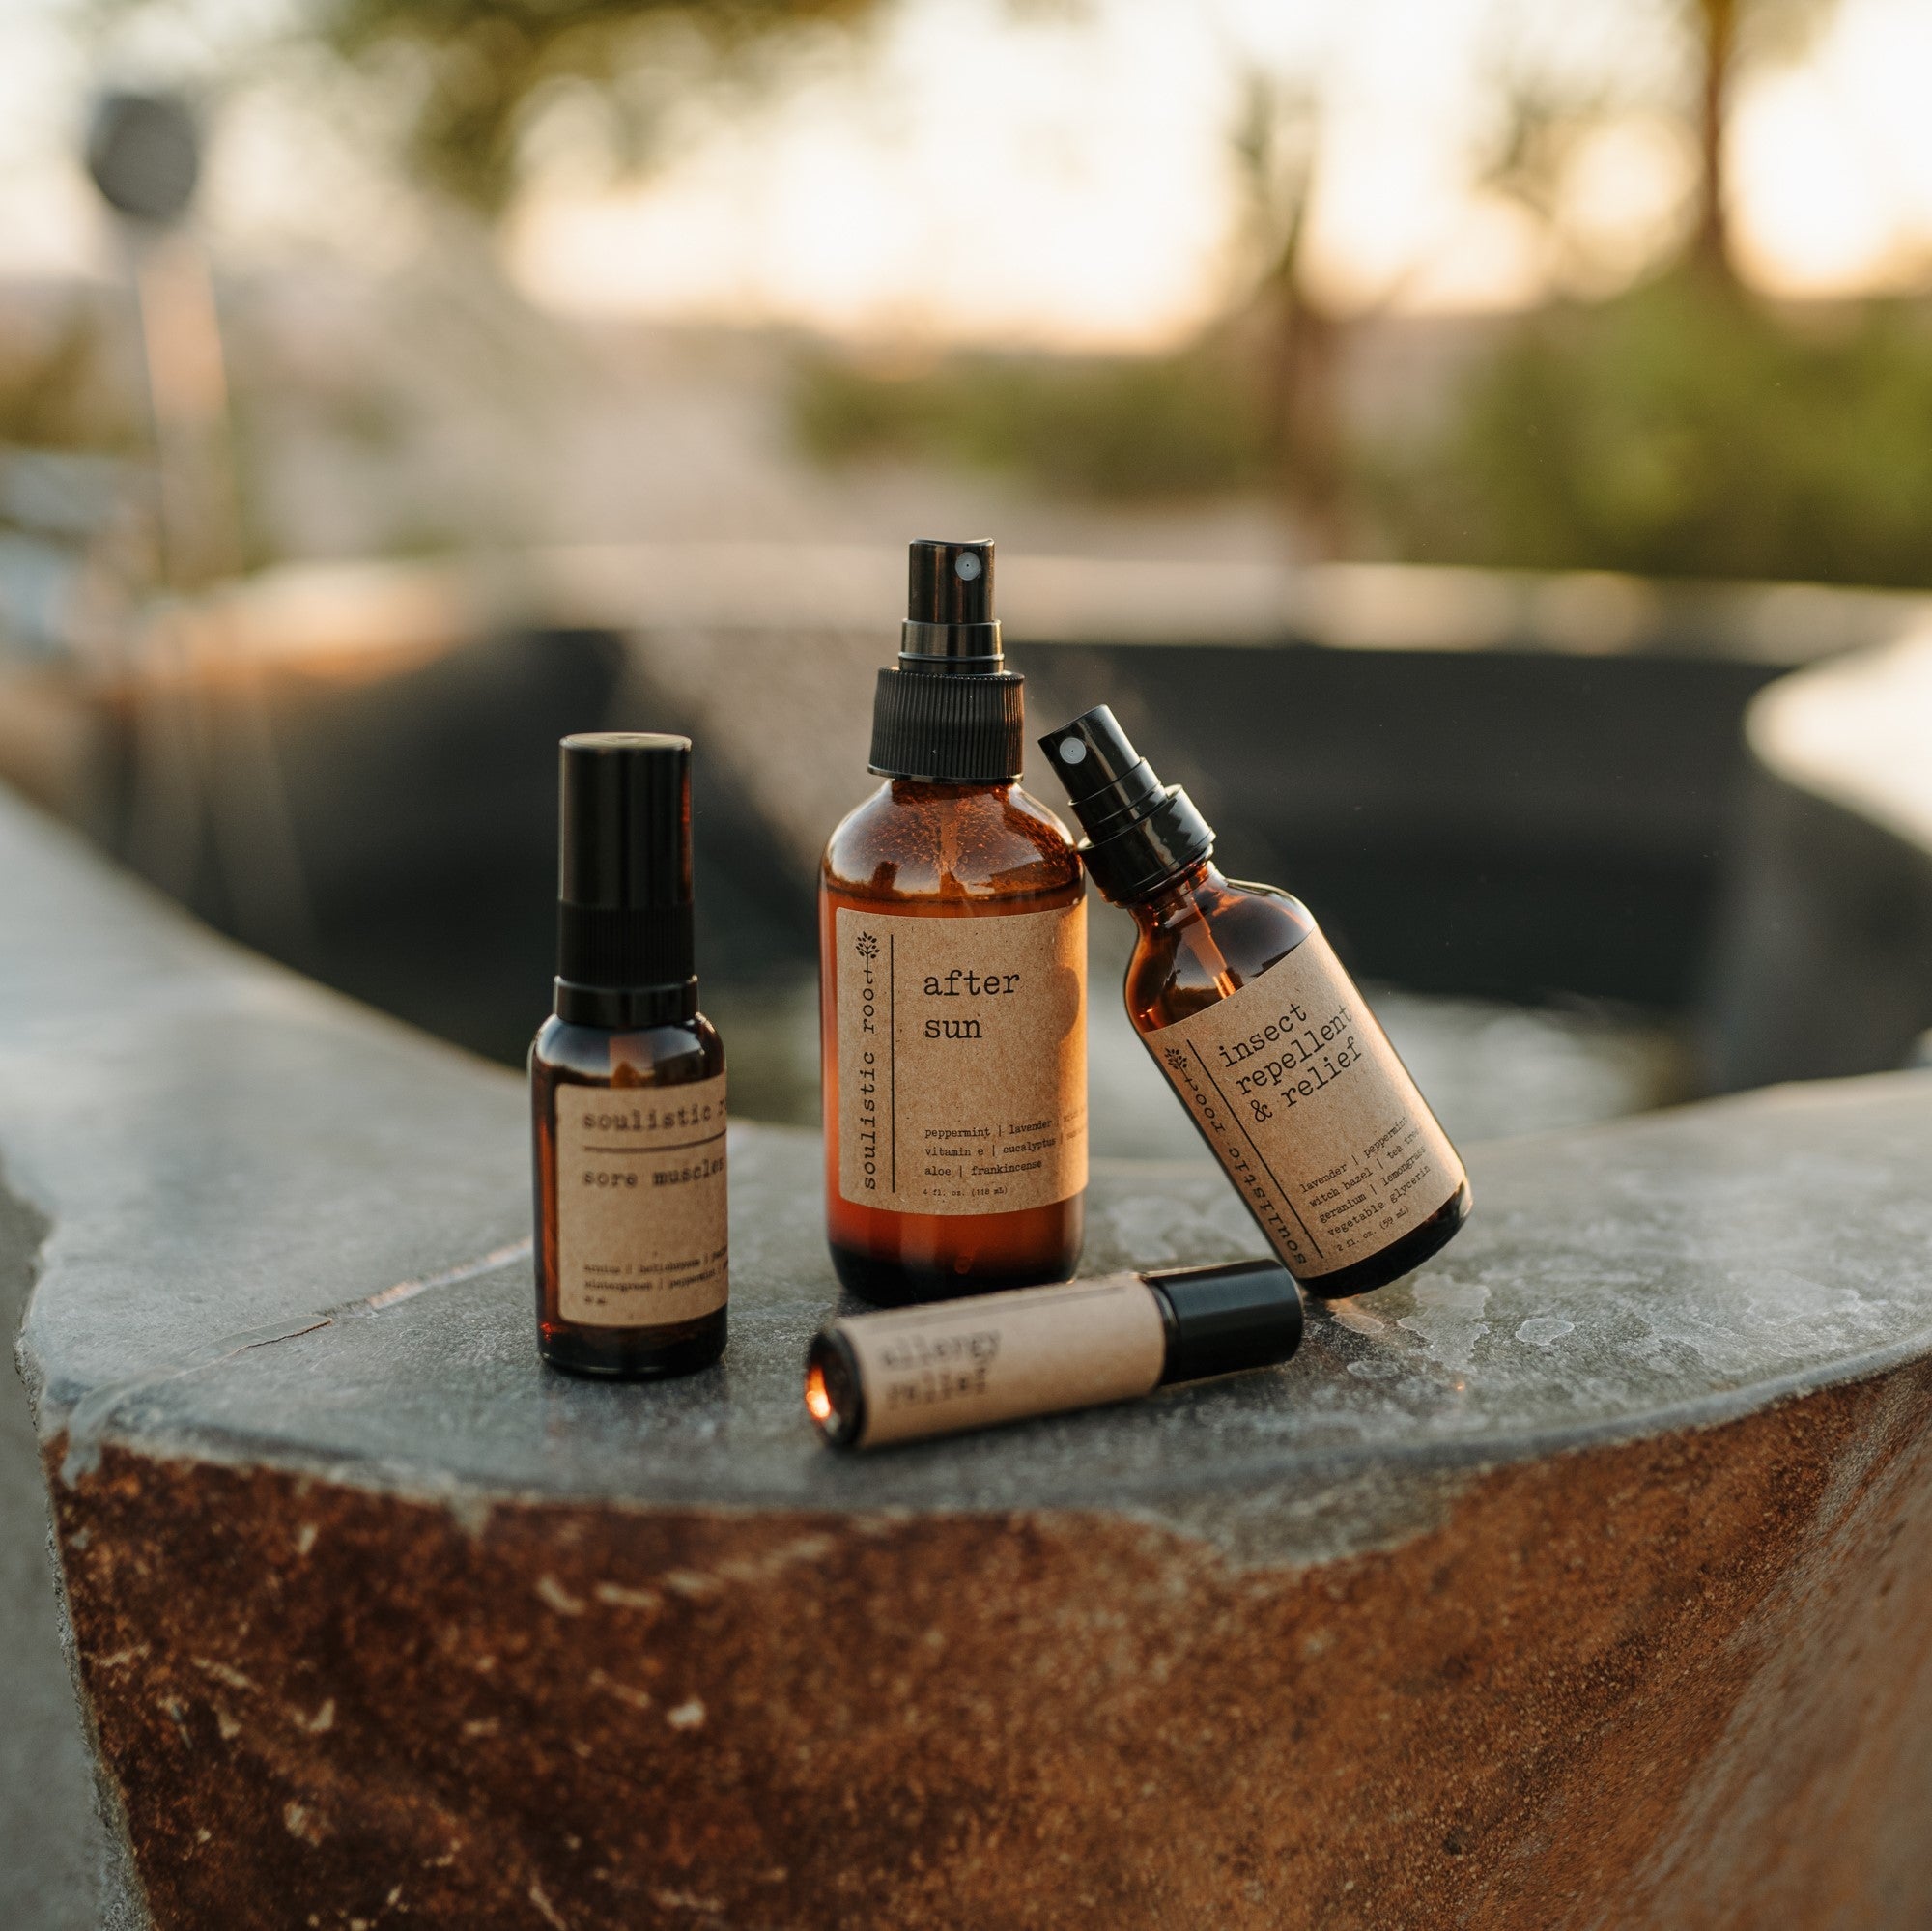 Group shot of natural products on a cement hot springs tub. Products include after sun, bug spray, allergy relief essential oil roller and sore muscle rub